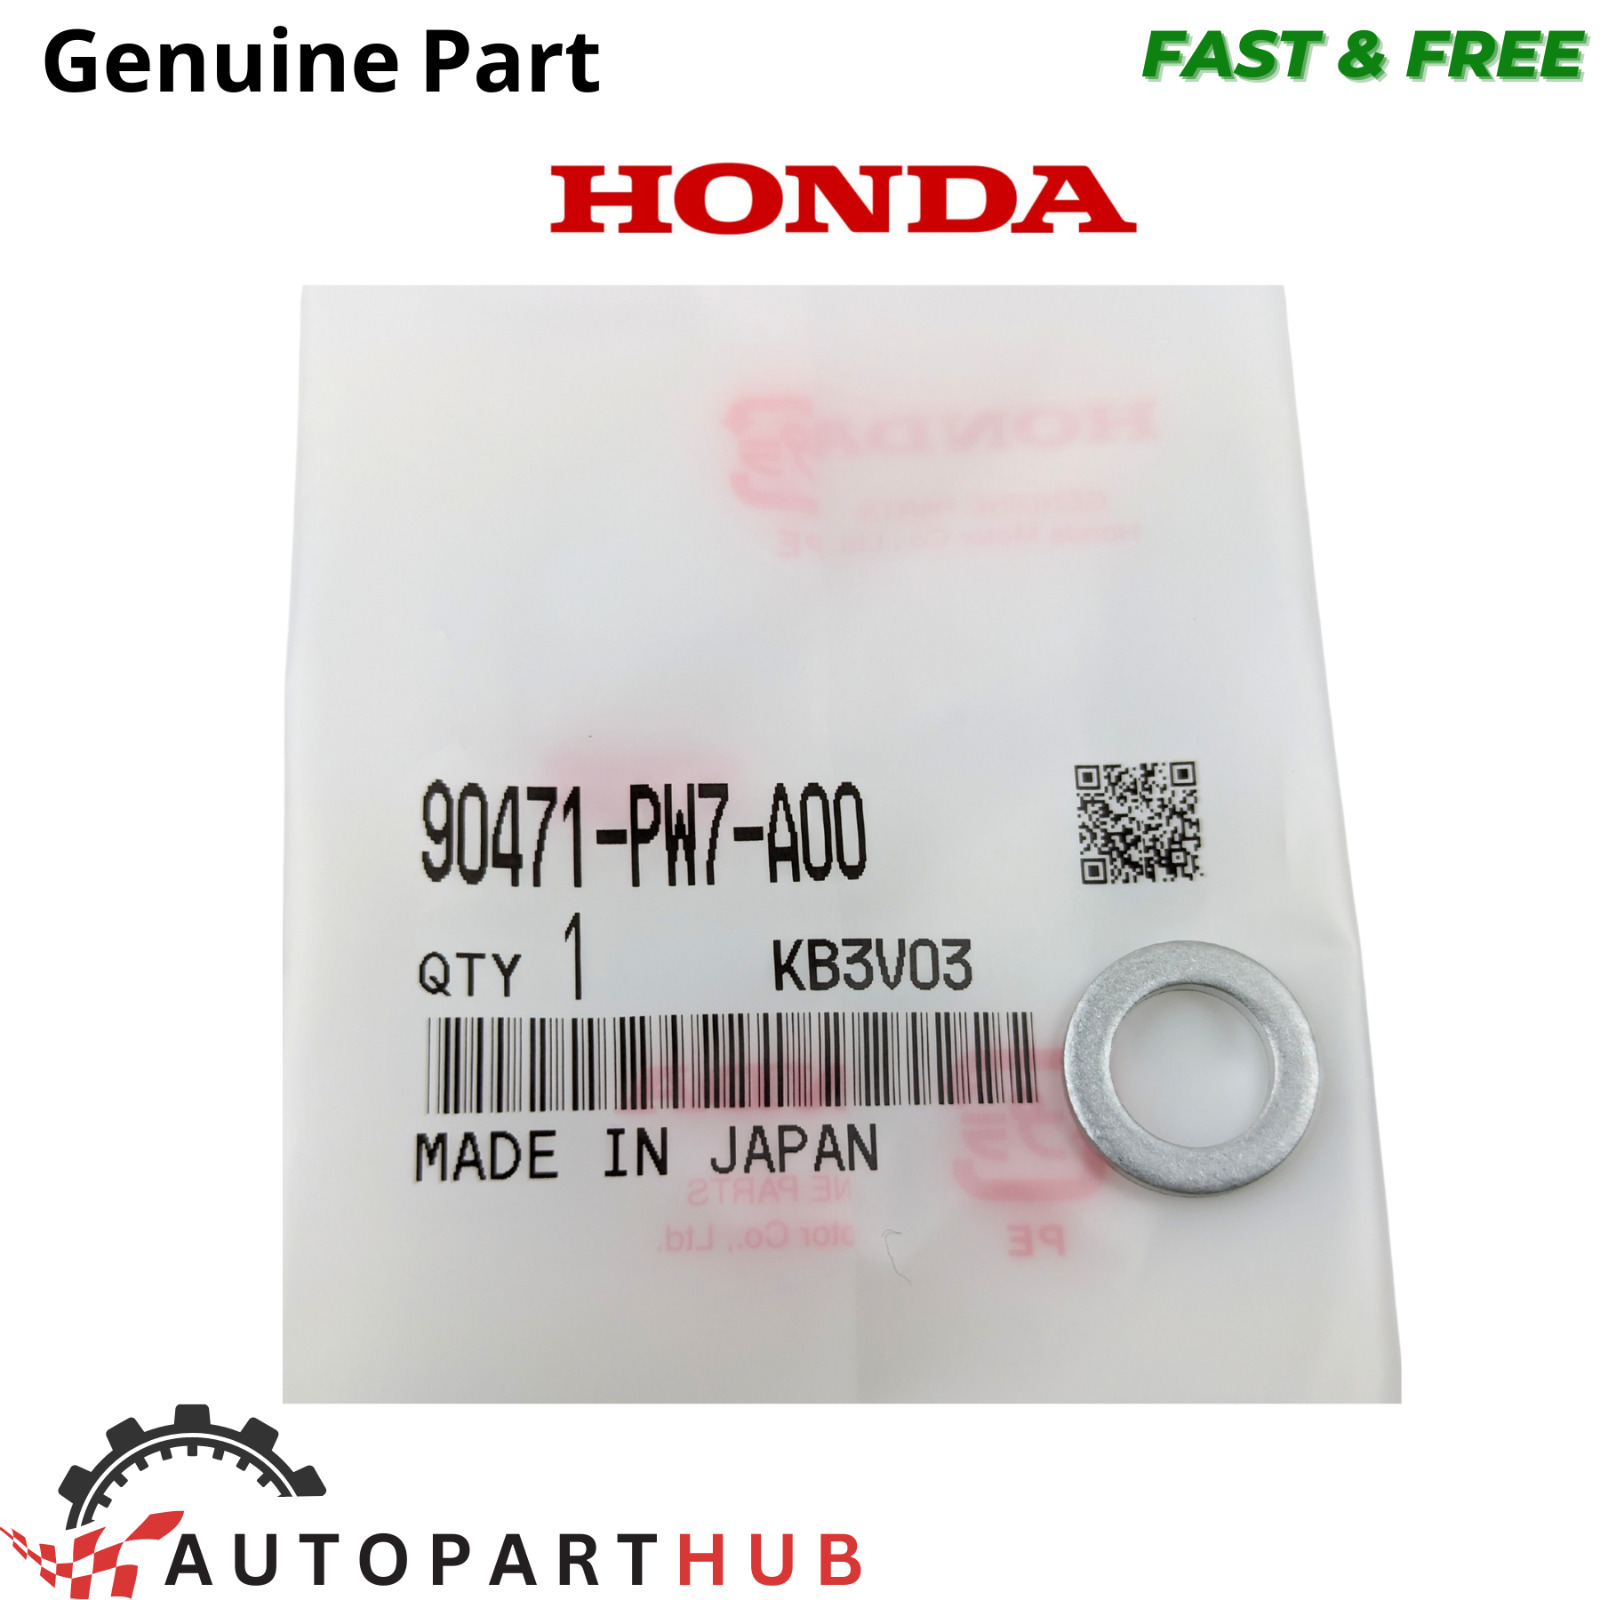 GENUINE HONDA ACURA GASKET DRAIN PLUG WASHER  10MM COIN SIZE 90471-PW7-A00 1 PC